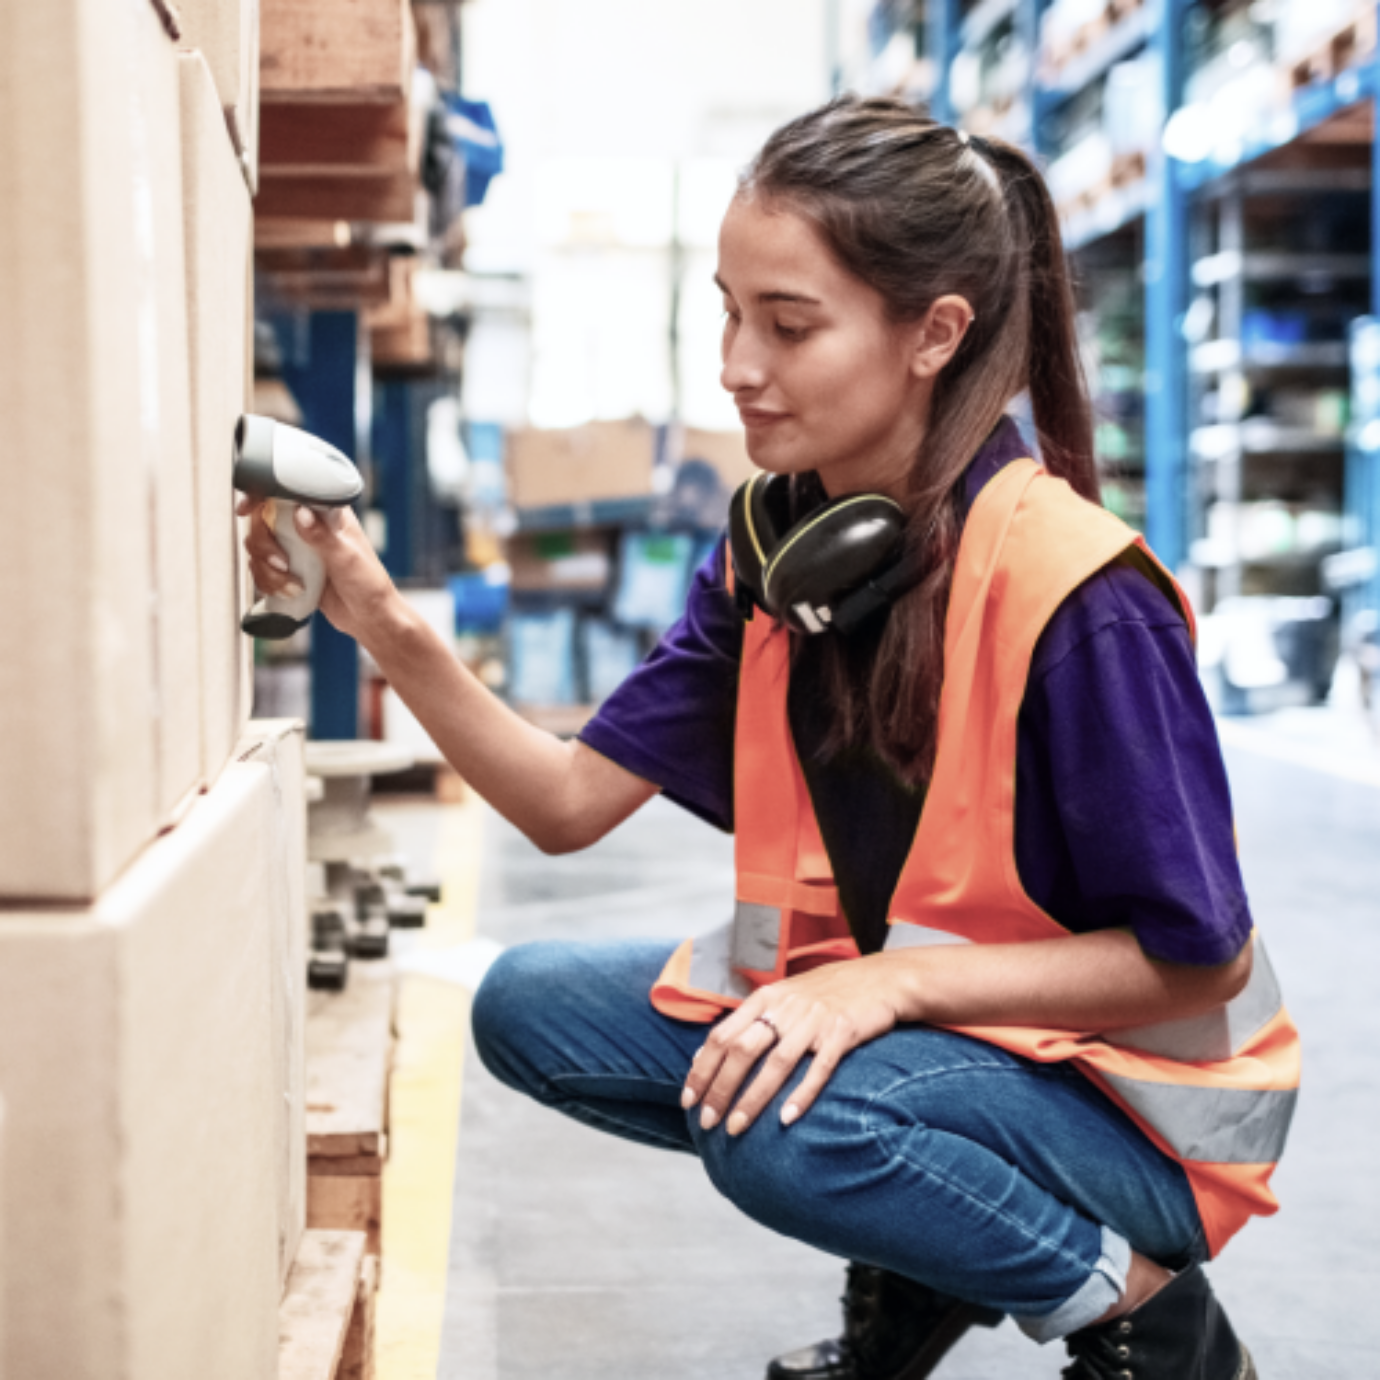 The image shows a young woman scanning boxes in a large warehouse during her part-time job.